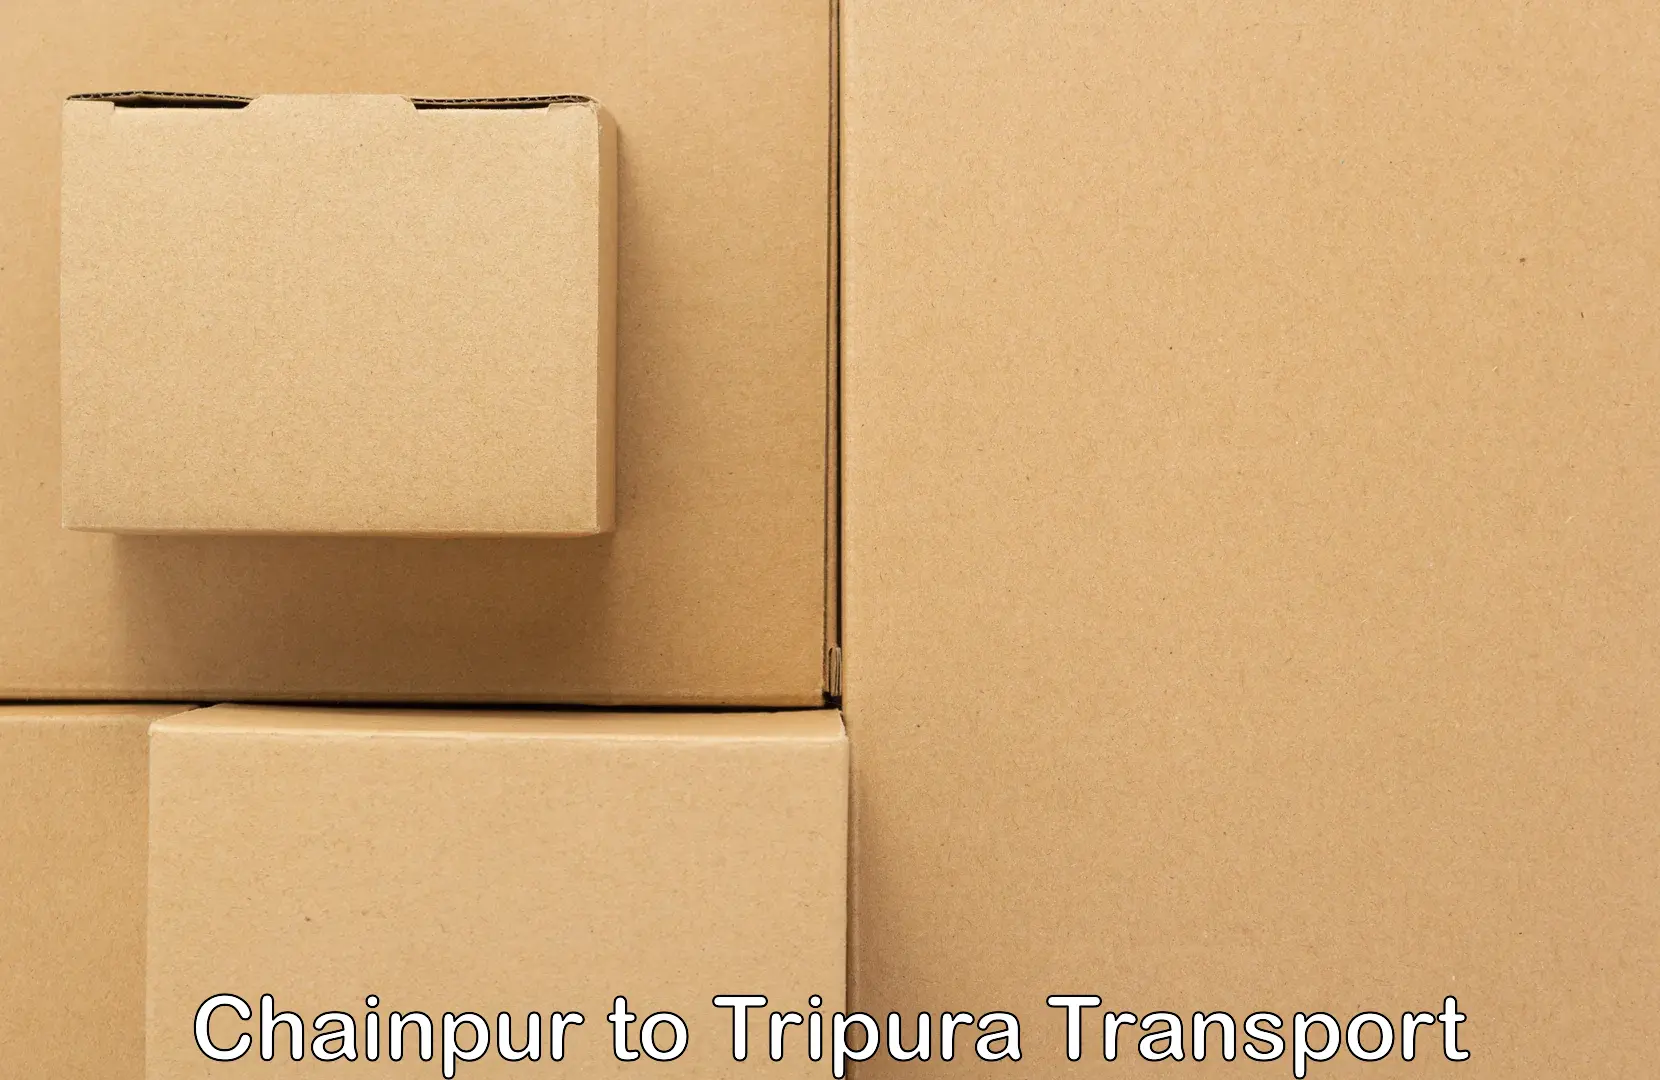 Container transport service Chainpur to Udaipur Tripura